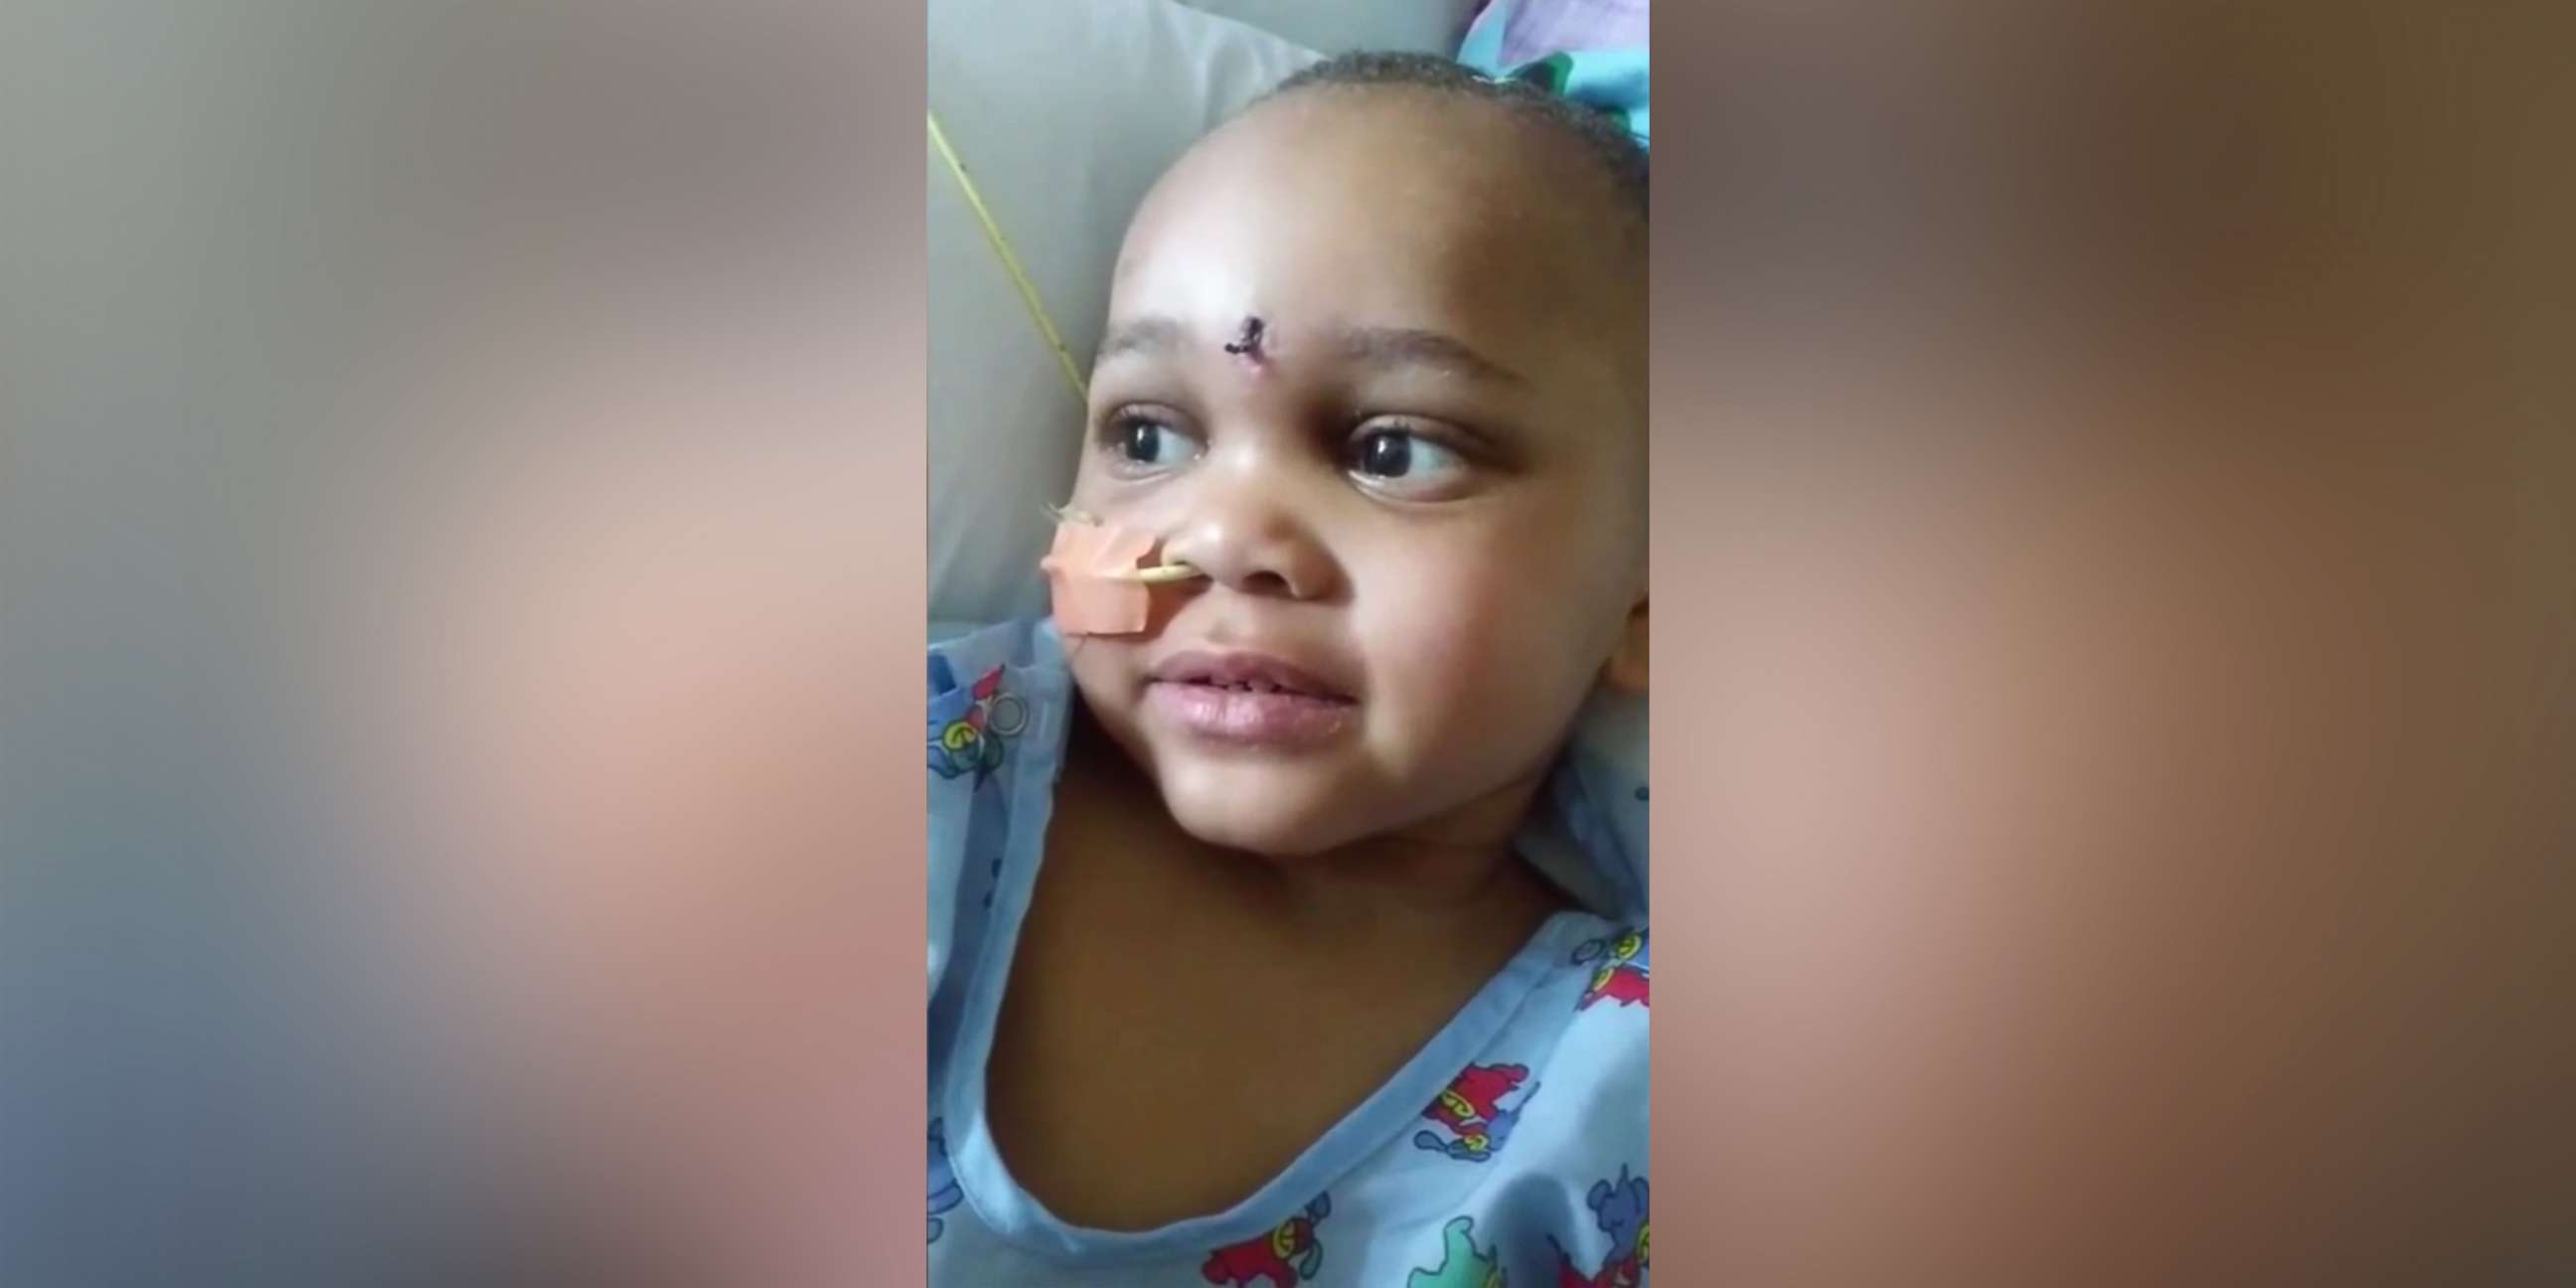 PHOTO: Na'Vaun Price Jackson, a 4-year-old Oakland boy who accidentally shot himself in the head, appeared in new videos posted by his grandfather on Facebook.